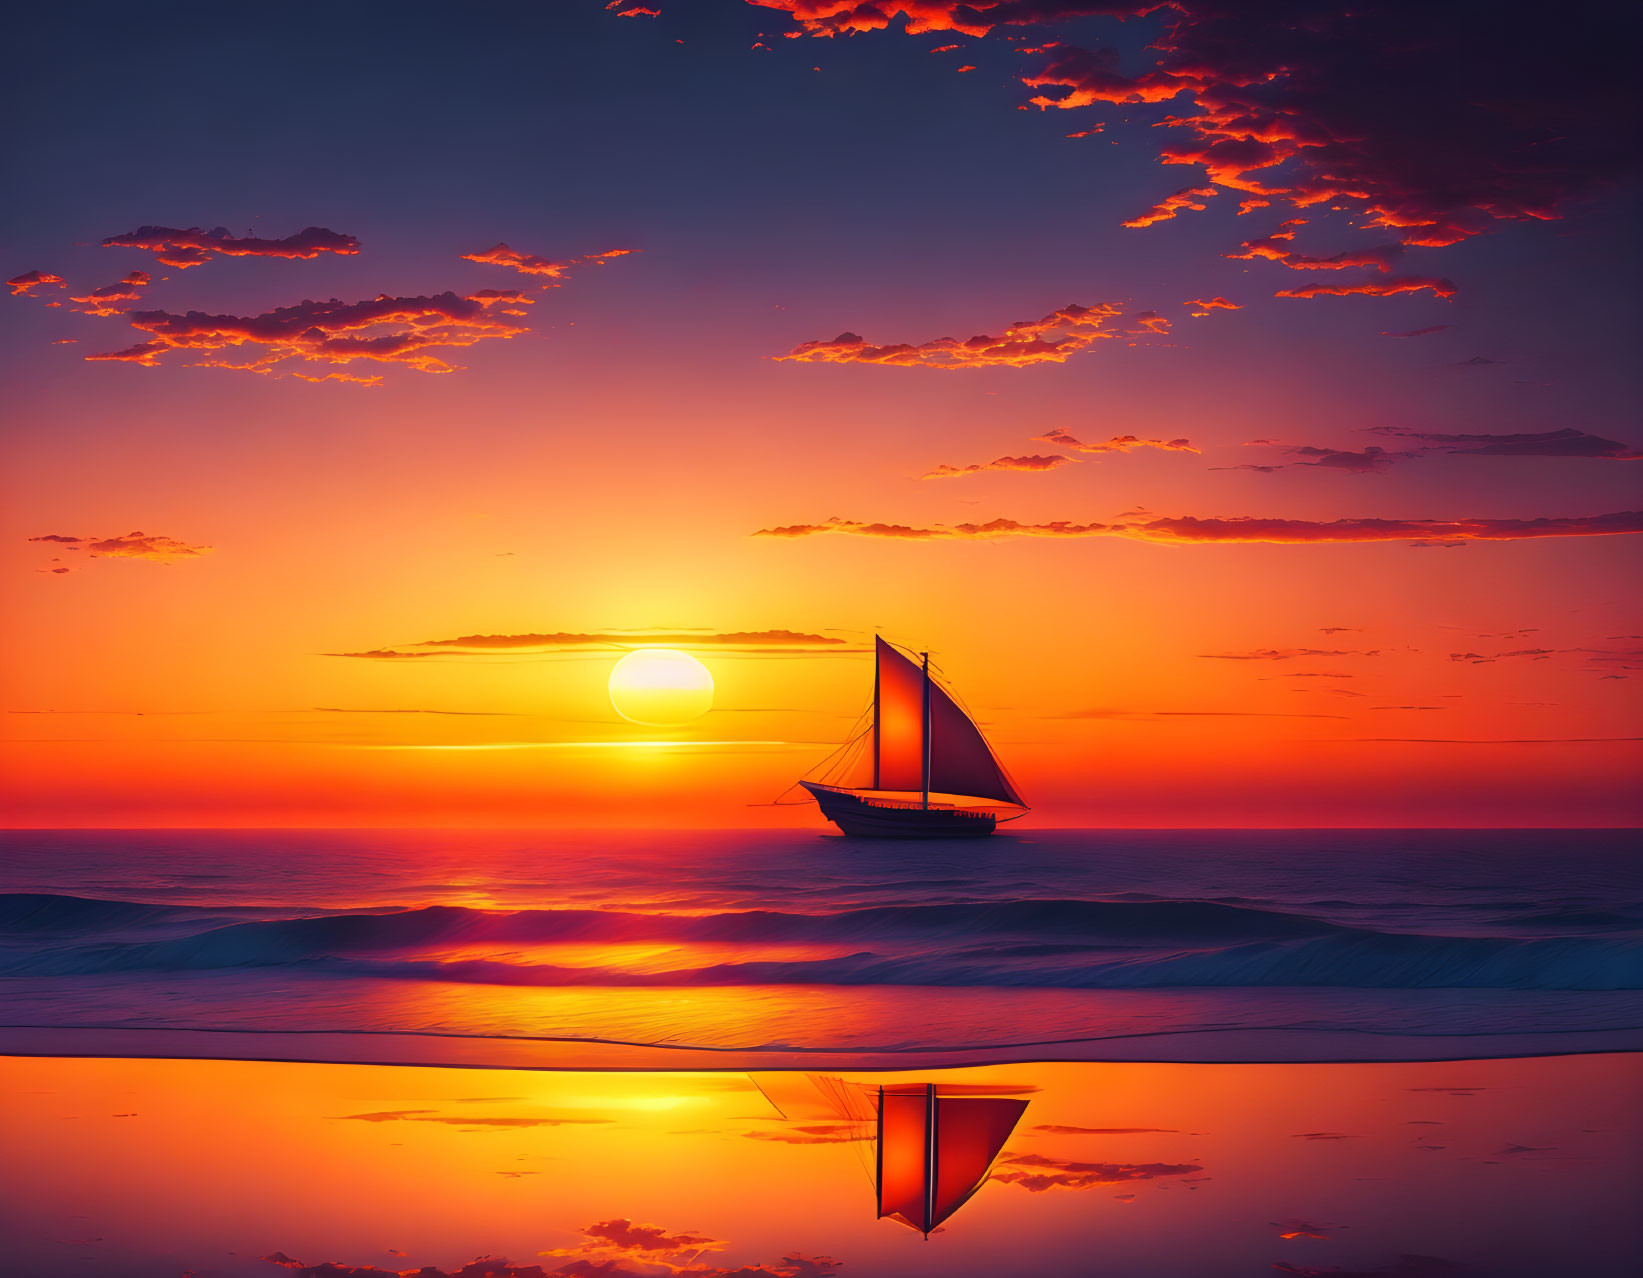 Sailboat silhouette at vibrant sunset over tranquil sea